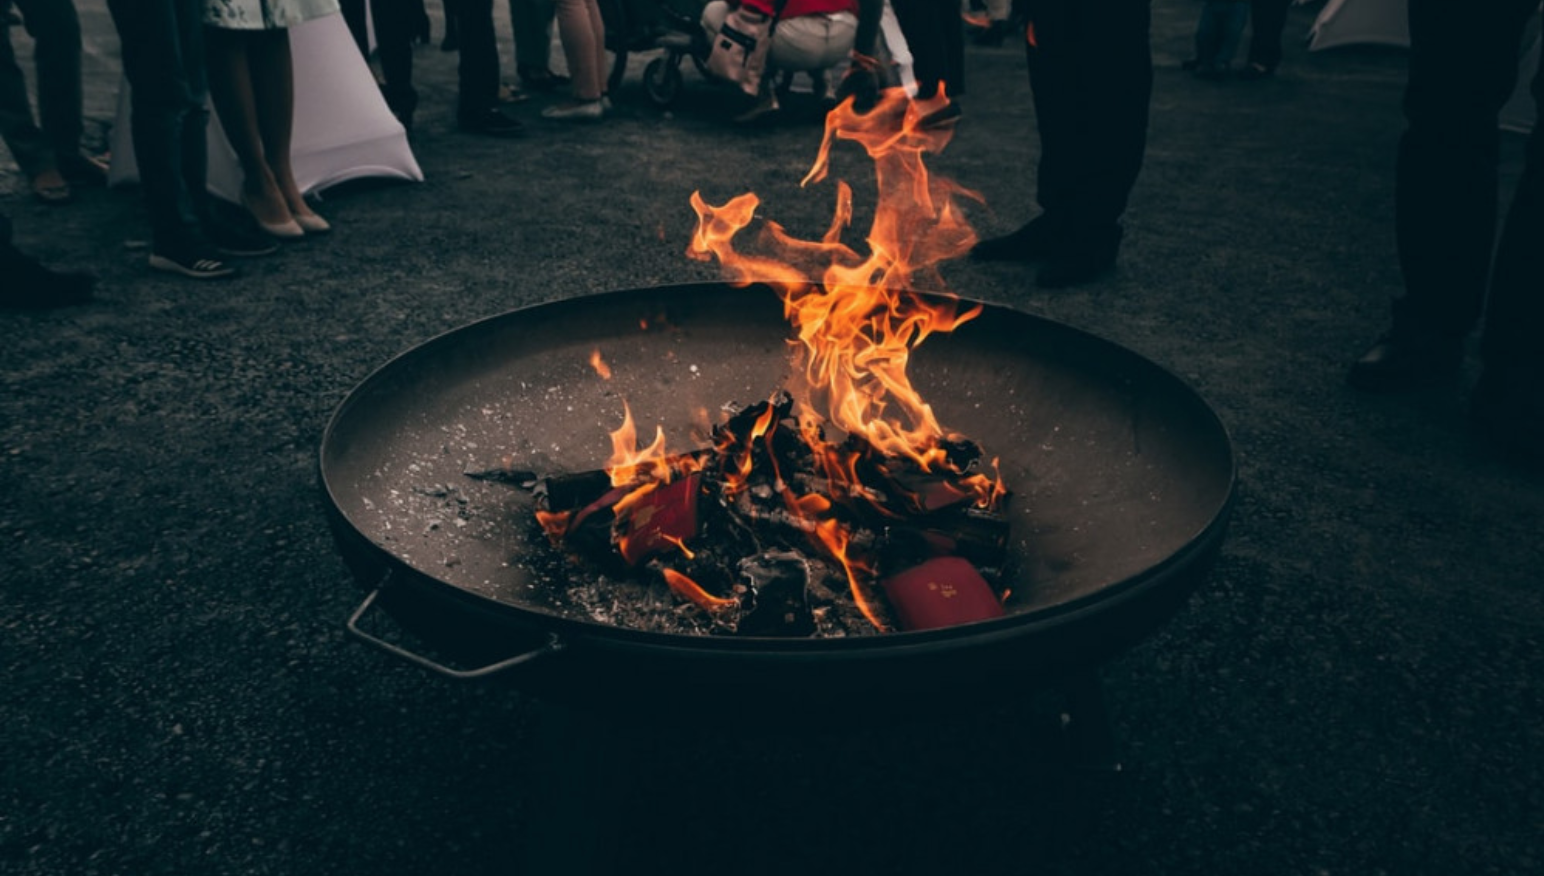 10 Things to Consider Before Building a Backyard Fire Pit - Fire Pit with People